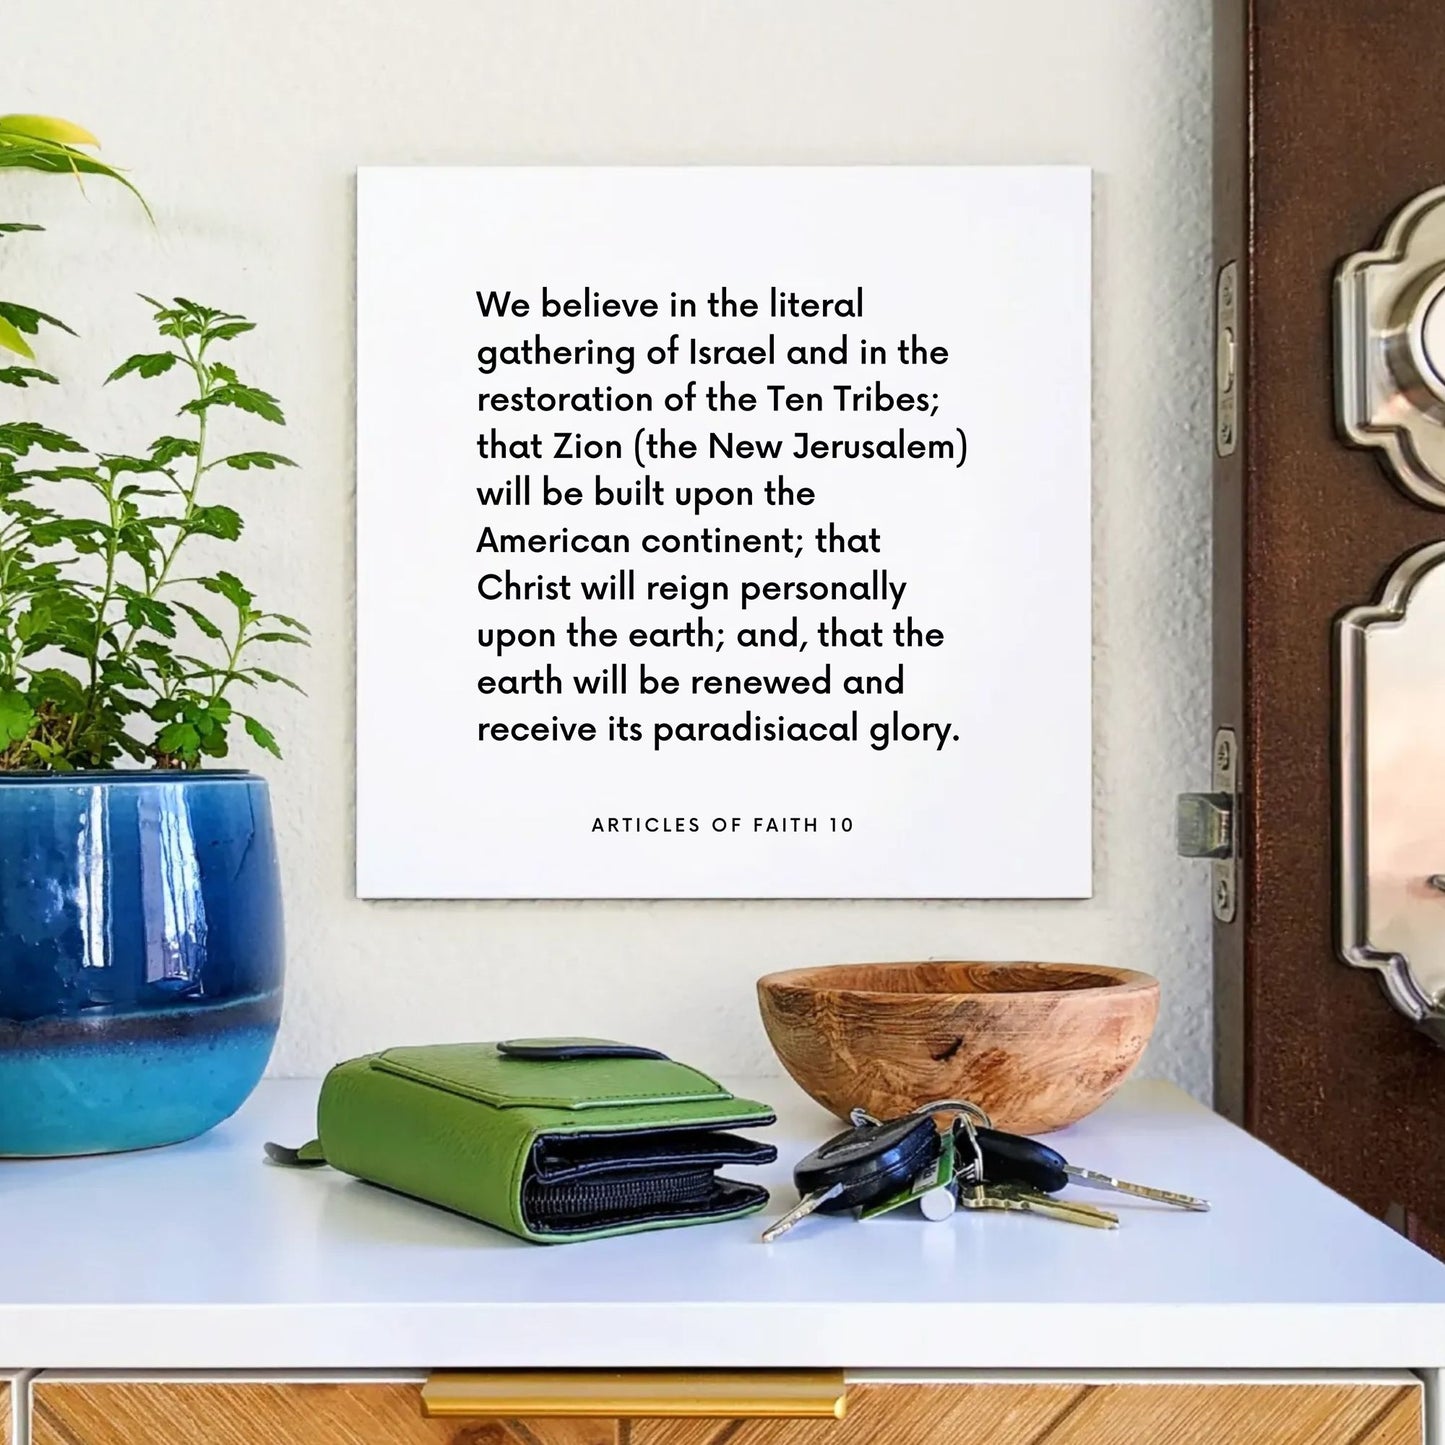 Entryway mouting of the scripture tile for Articles of Faith 10 - "We believe in the literal gathering of Israel"